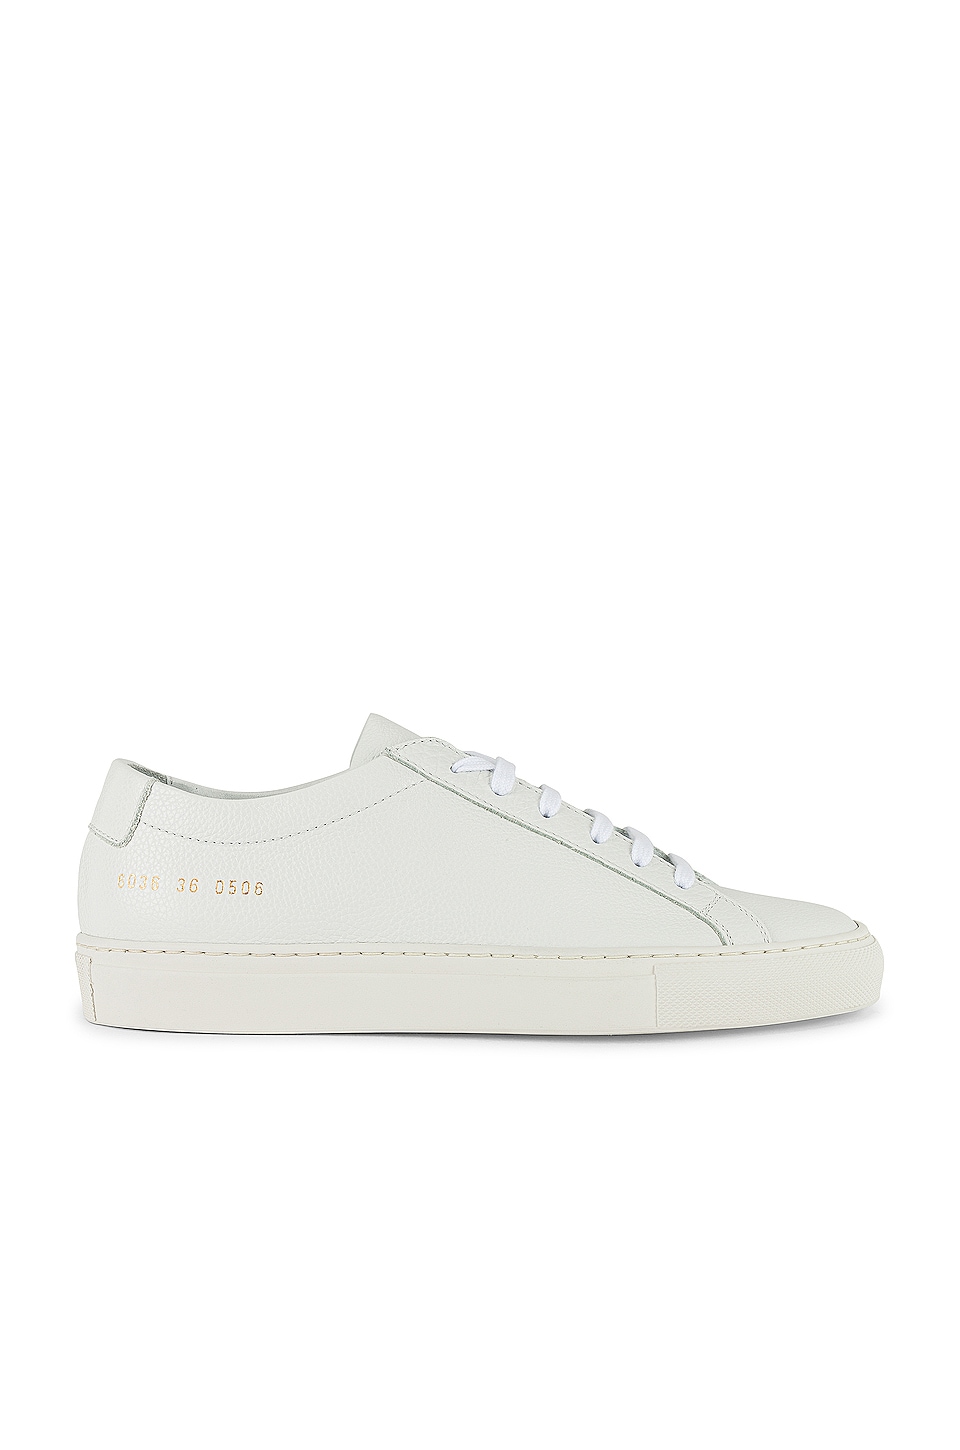 Common Projects Achilles Pebbled Sneaker in White | REVOLVE